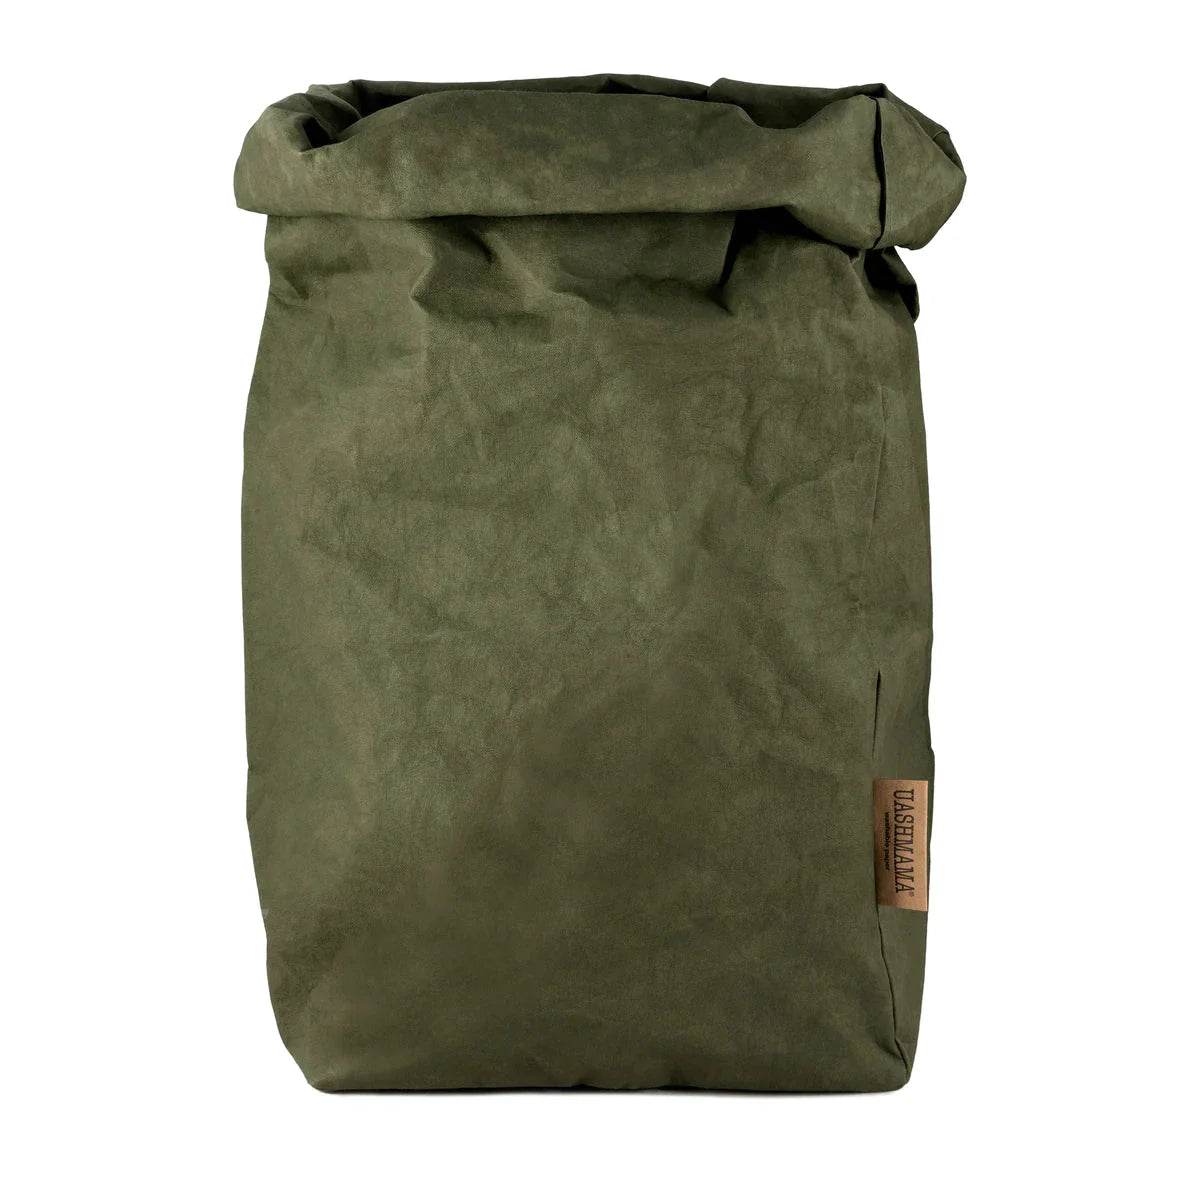 A washable paper bag is shown. The bag is rolled down at the top and features a UASHMAMA logo label on the bottom left corner. The bag pictured is the extra extra large size in dark green.